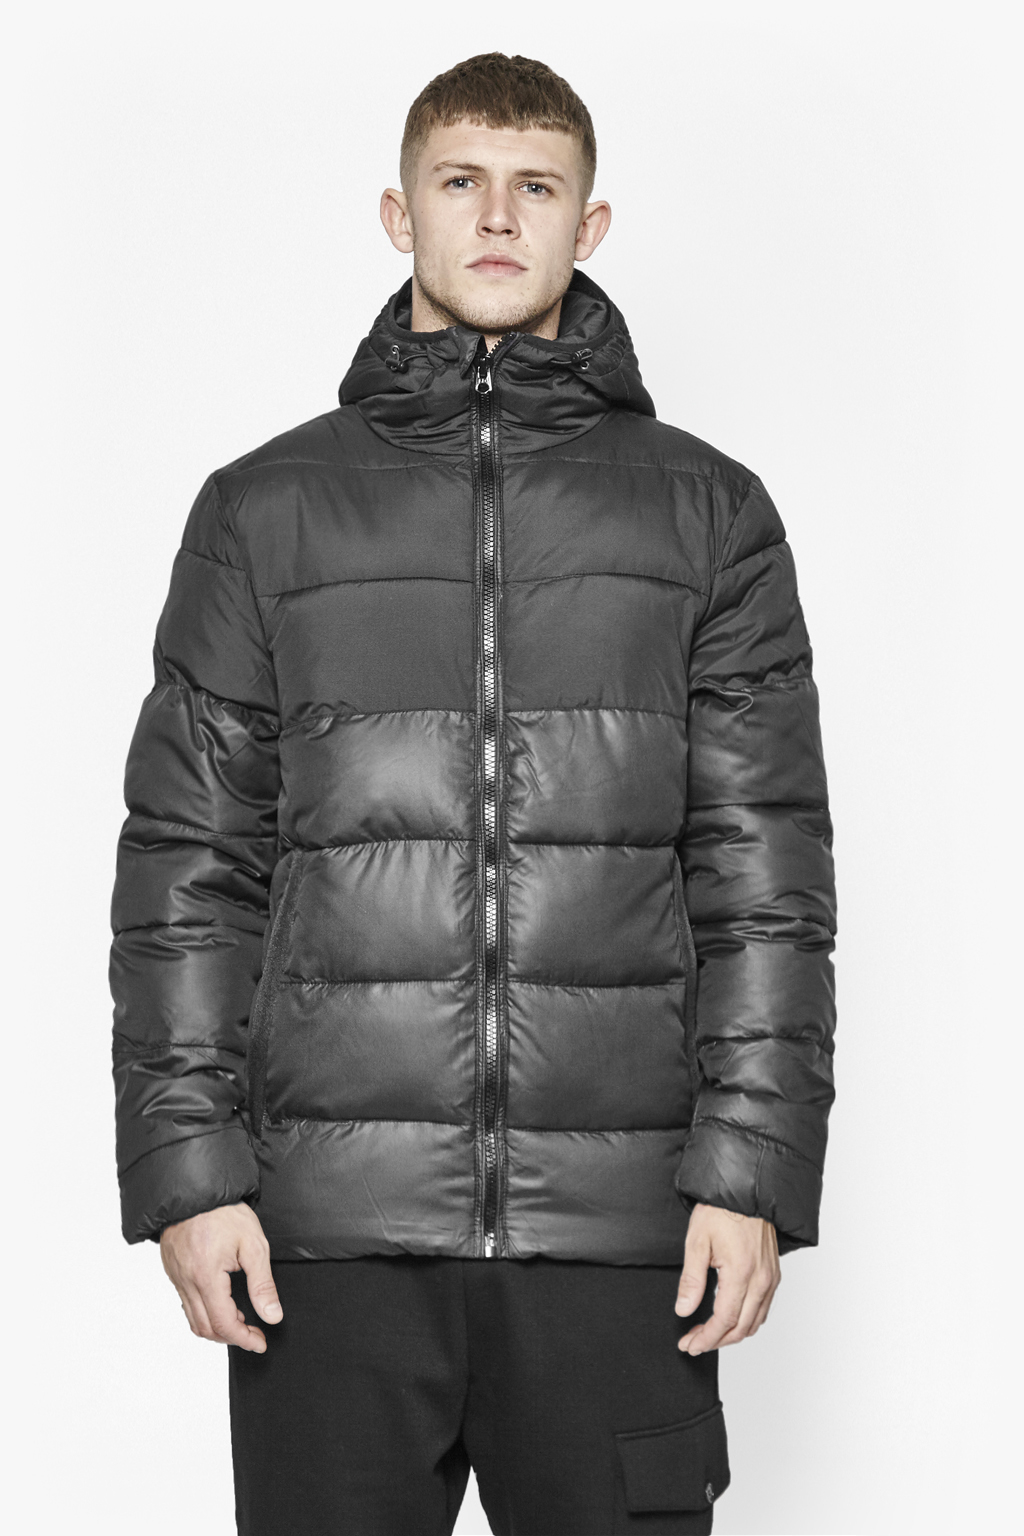 French connection Split Trent Puffa Jacket in Black for Men | Lyst